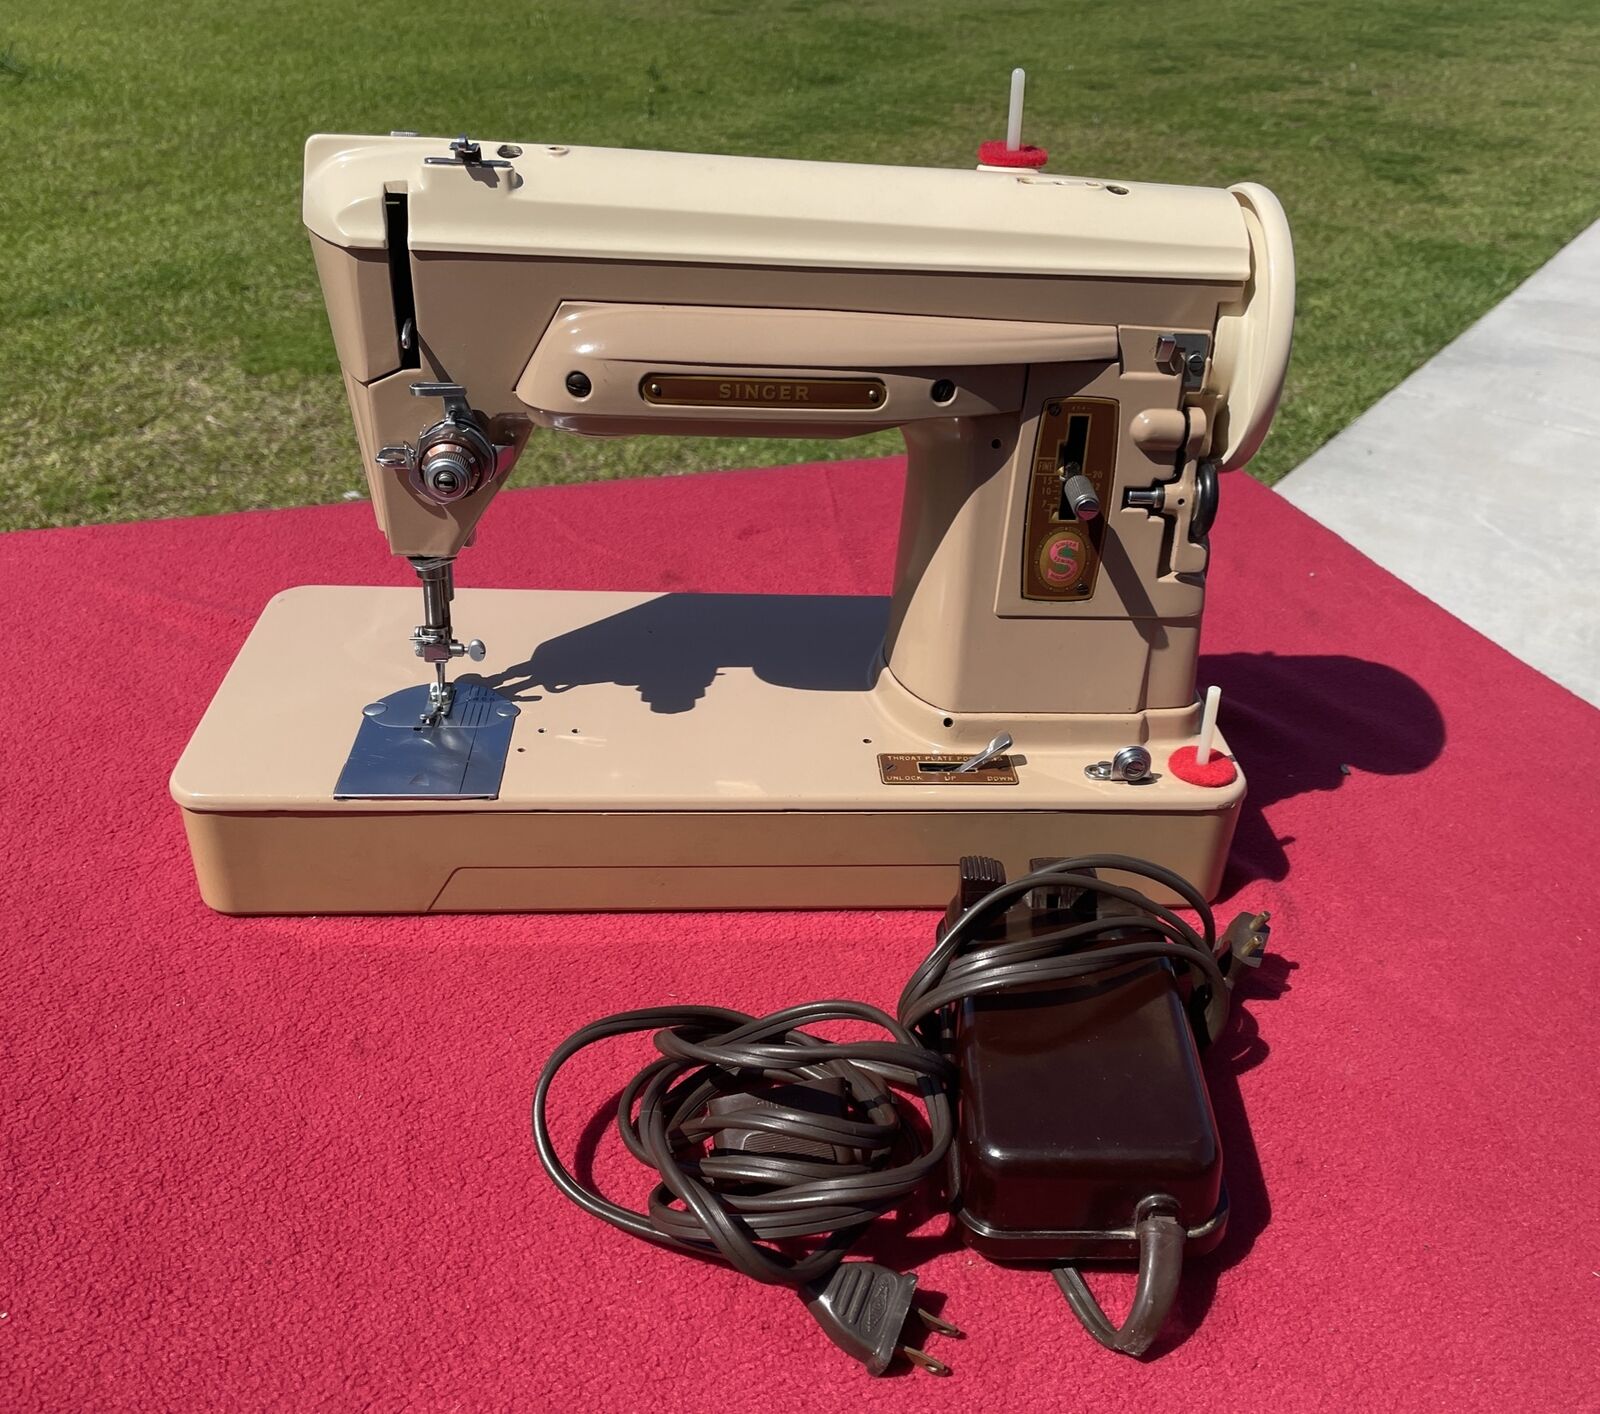 Singer 404 Sewing Machine with Case 1959 Serial AM987920